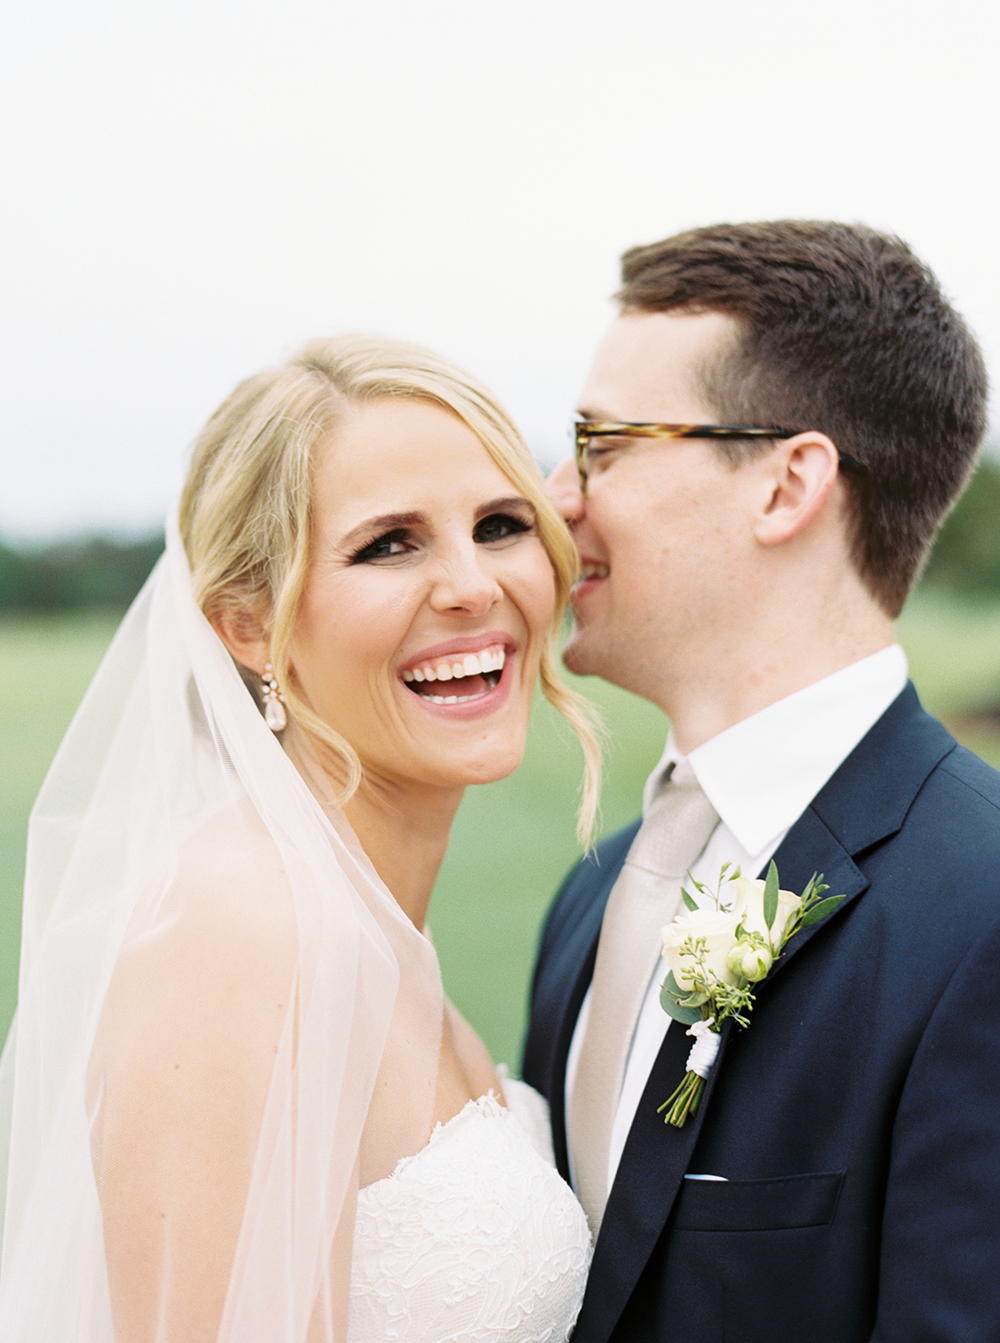 kirsten and andrew - wedding photography in houston